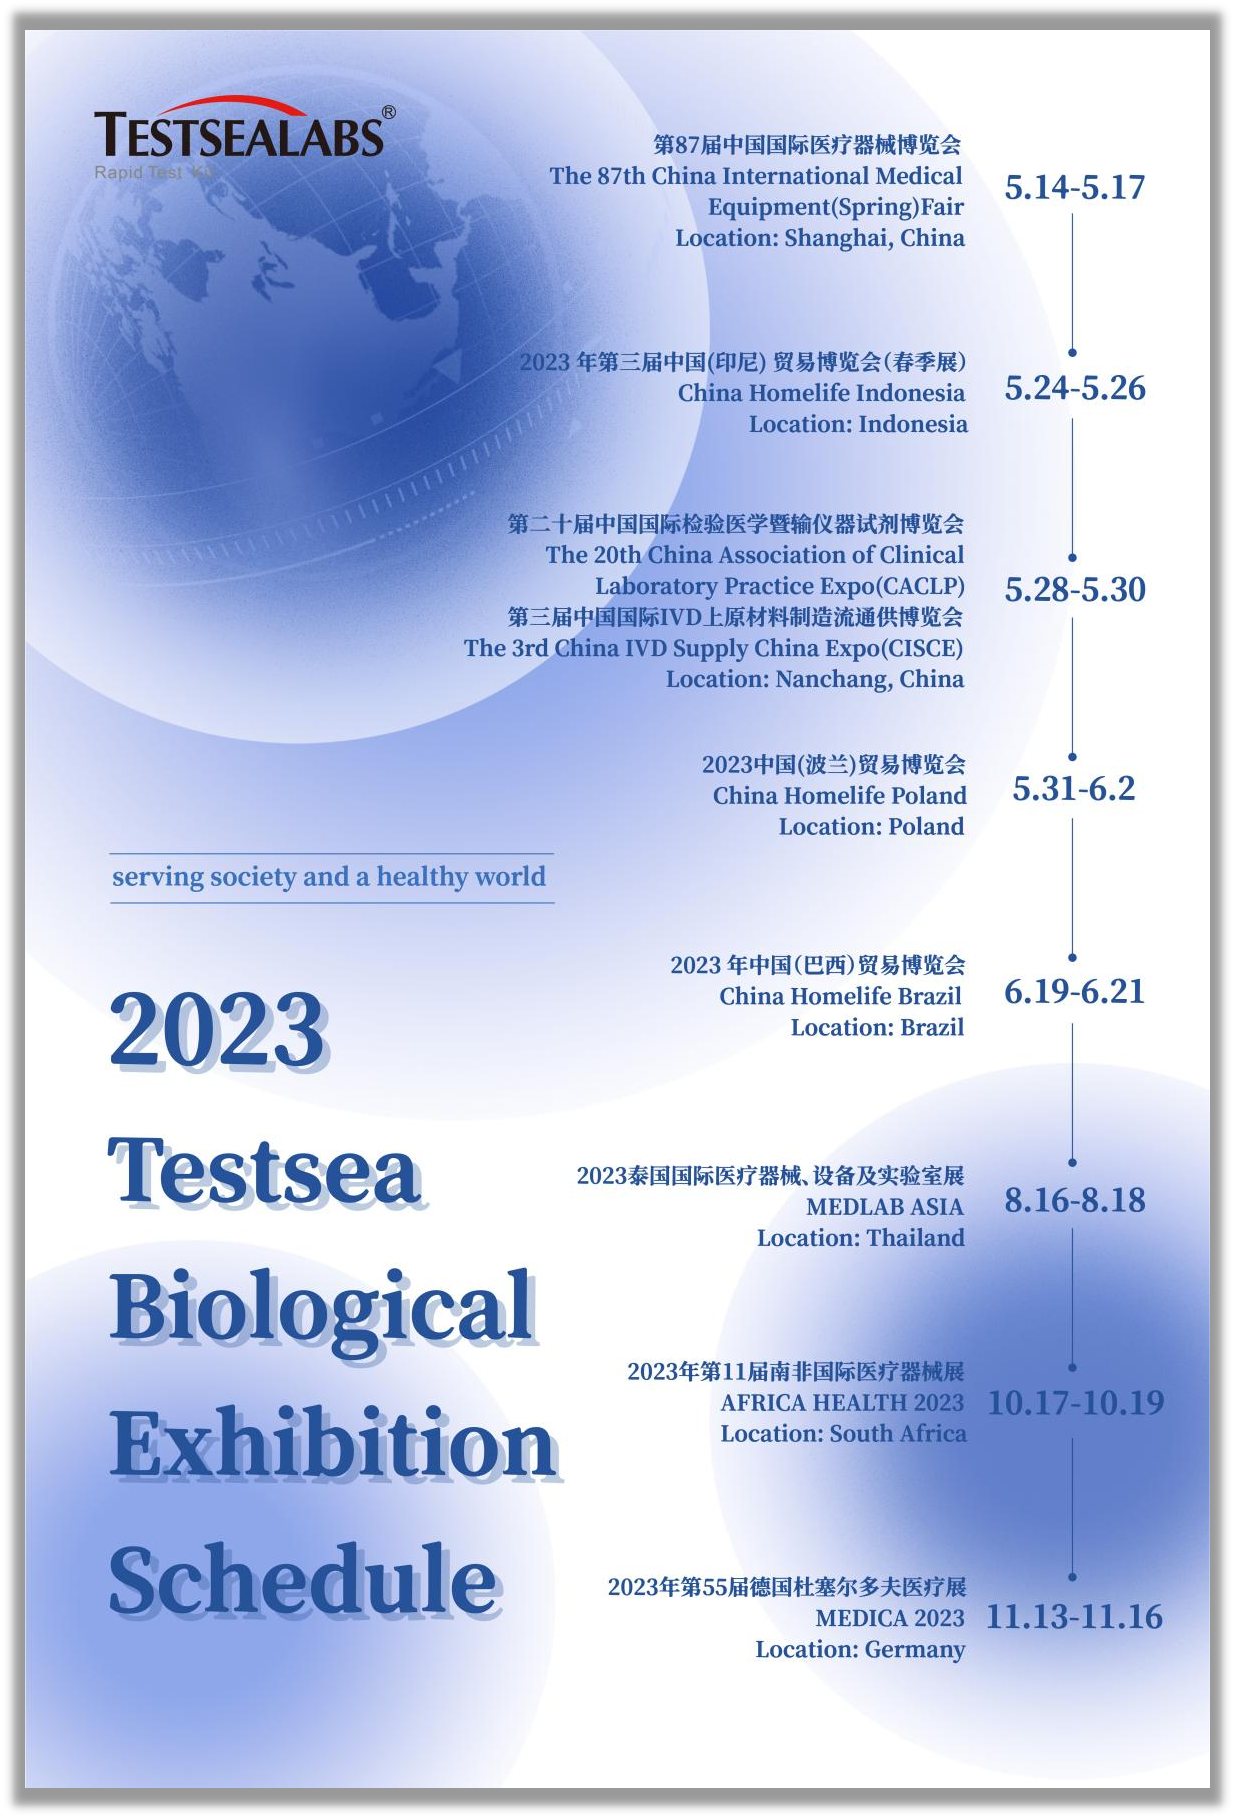 2023 Testsea Biological Exhibition Time